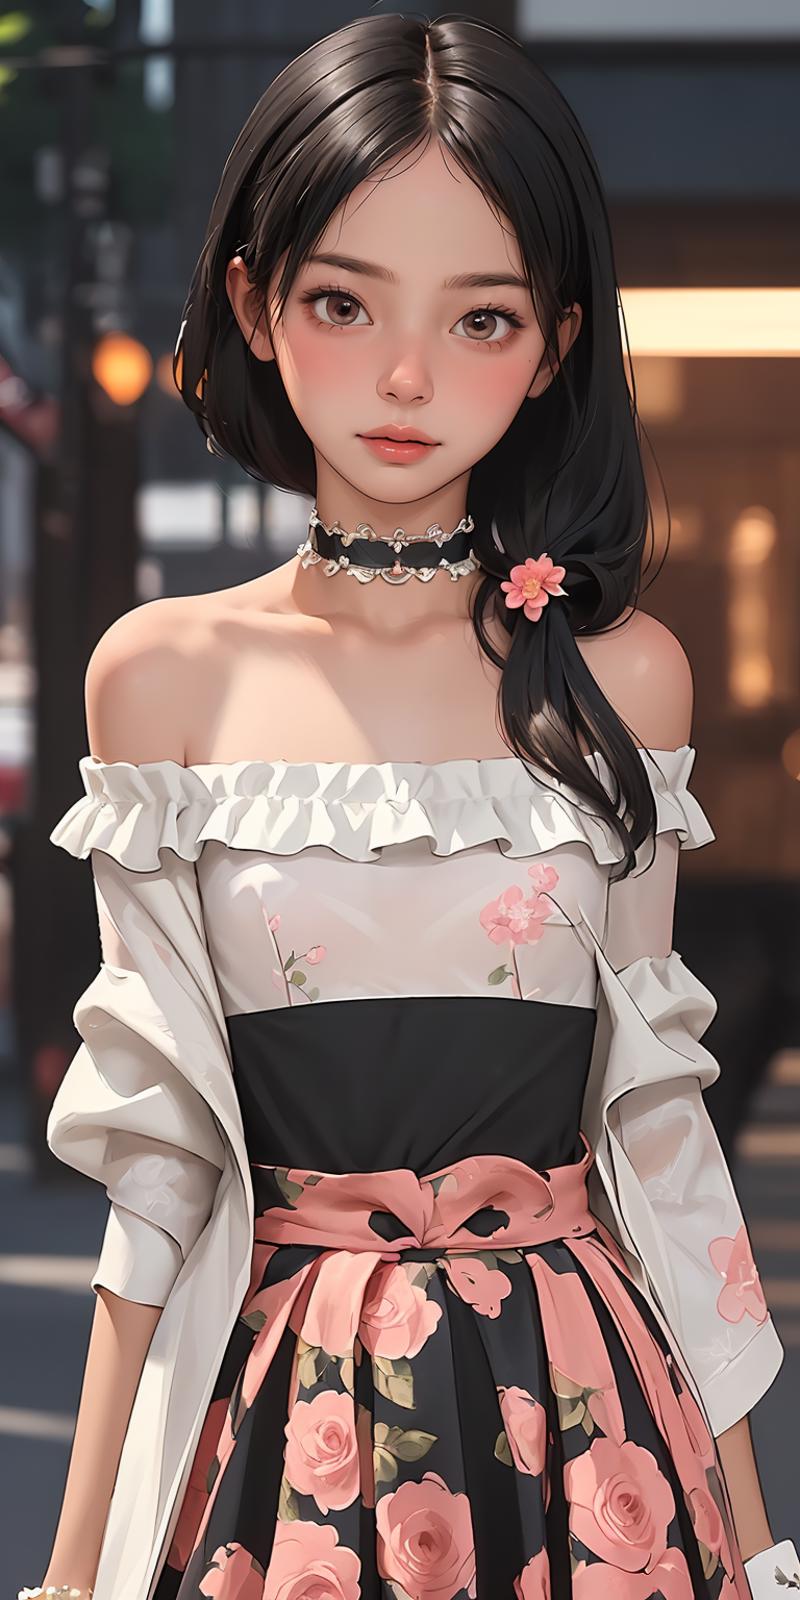 A computer-generated image of a young woman wearing a white and black dress with a black choker, pink flowers, and a pink bow.